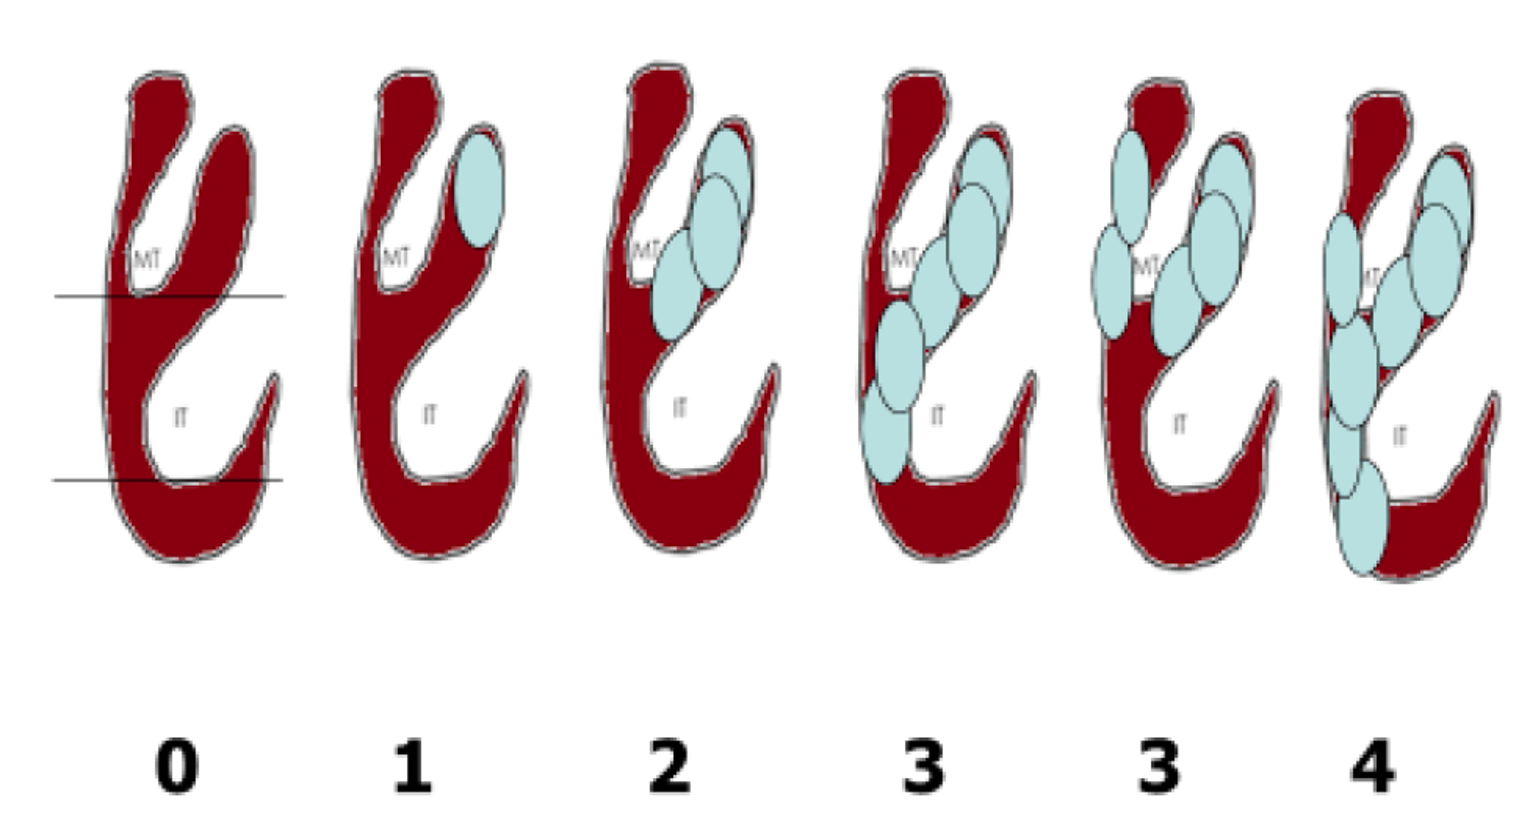 The figure shows 6 illustrations of a nasal passage, each with a different number of polyps in different positions (the first has no polyps). Under each illustration is the nasal polyp score: 0, 1, 2, 3, 3, 4. These scores are defined as follows: 0 = no polyps; 1 = small polyps in the middle meatus not reaching below the inferior border of the middle concha; 2 = polyps reaching below the lower border of the middle turbinate; 3 = large polyps reaching the lower border of the inferior turbinate or polyps medial to the middle concha; 4 = large polyps causing complete congestion or obstruction of the inferior meatus.